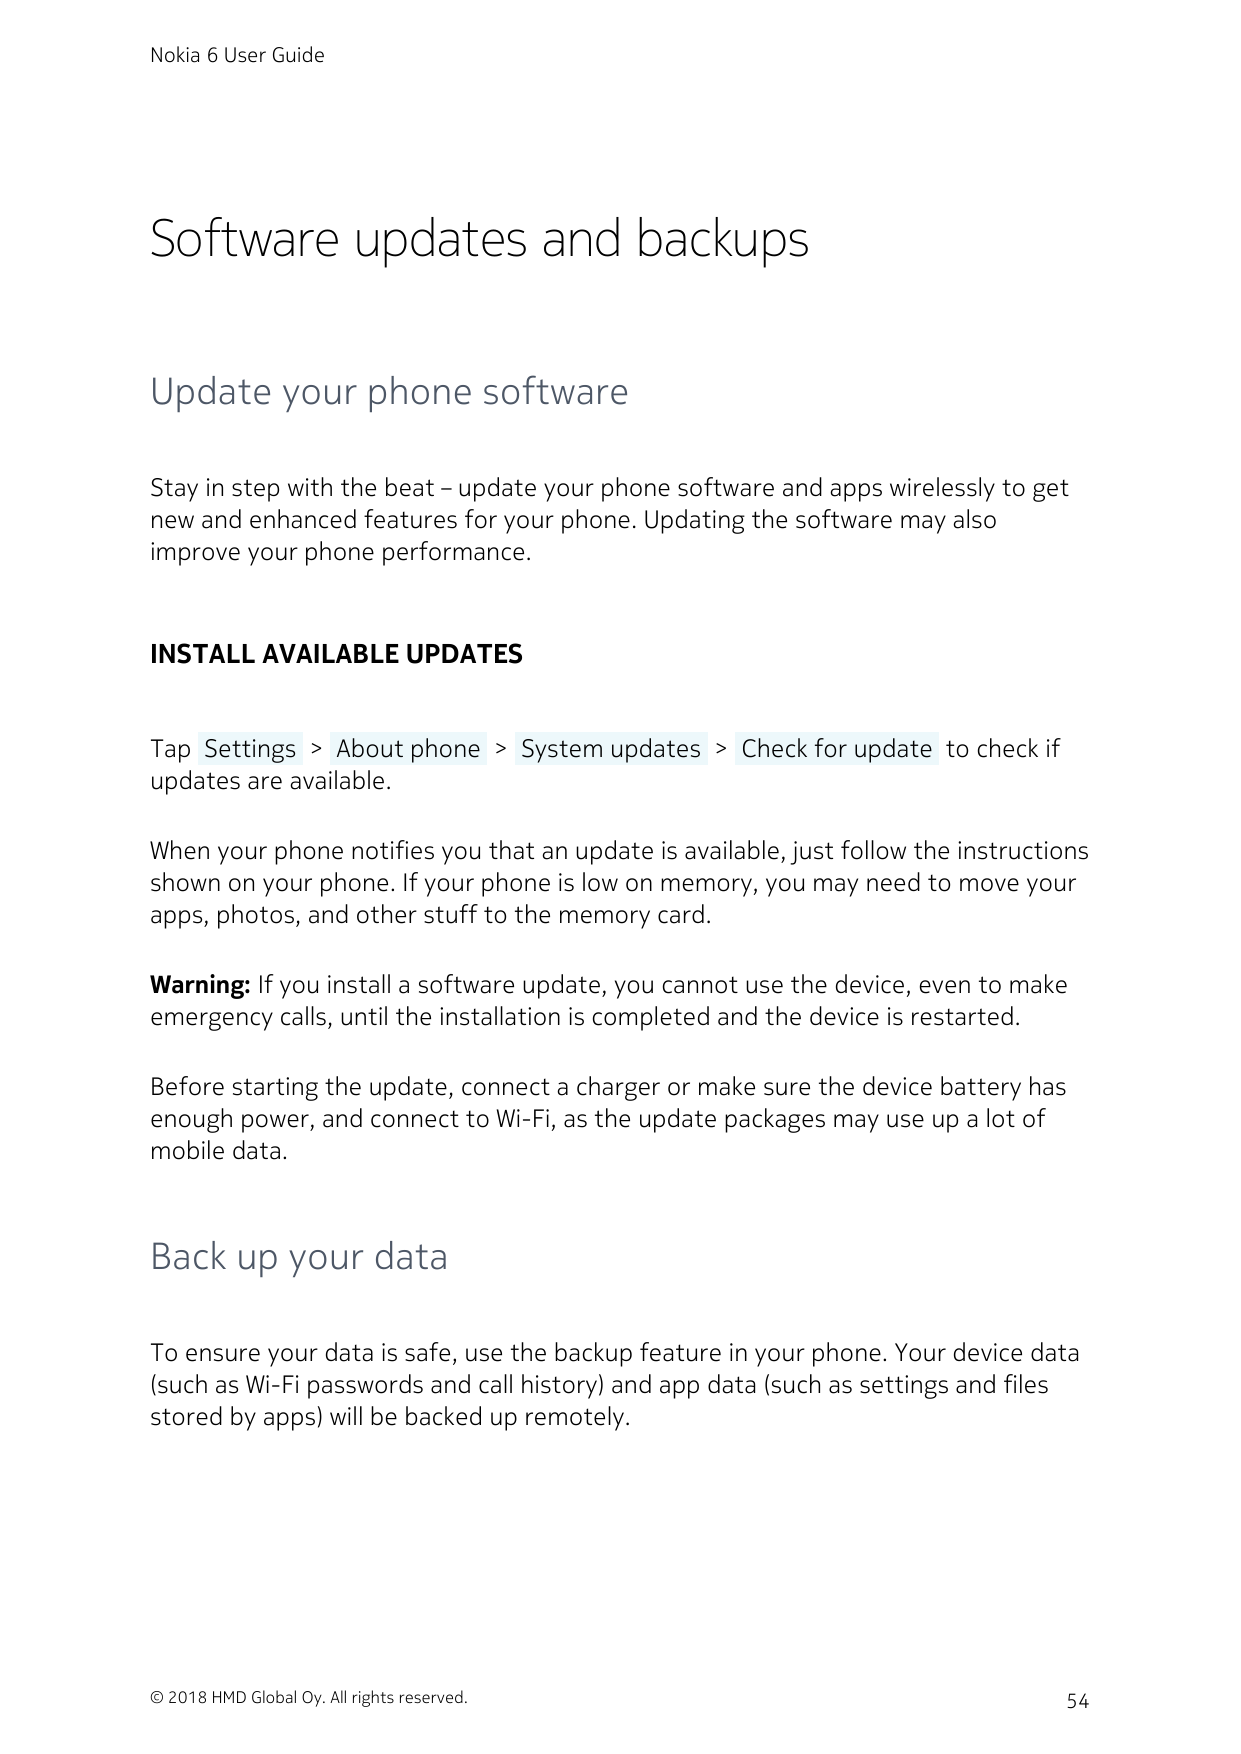 Nokia 6 User GuideSoftware updates and backupsUpdate your phone softwareStay in step with the beat – update your phone software 